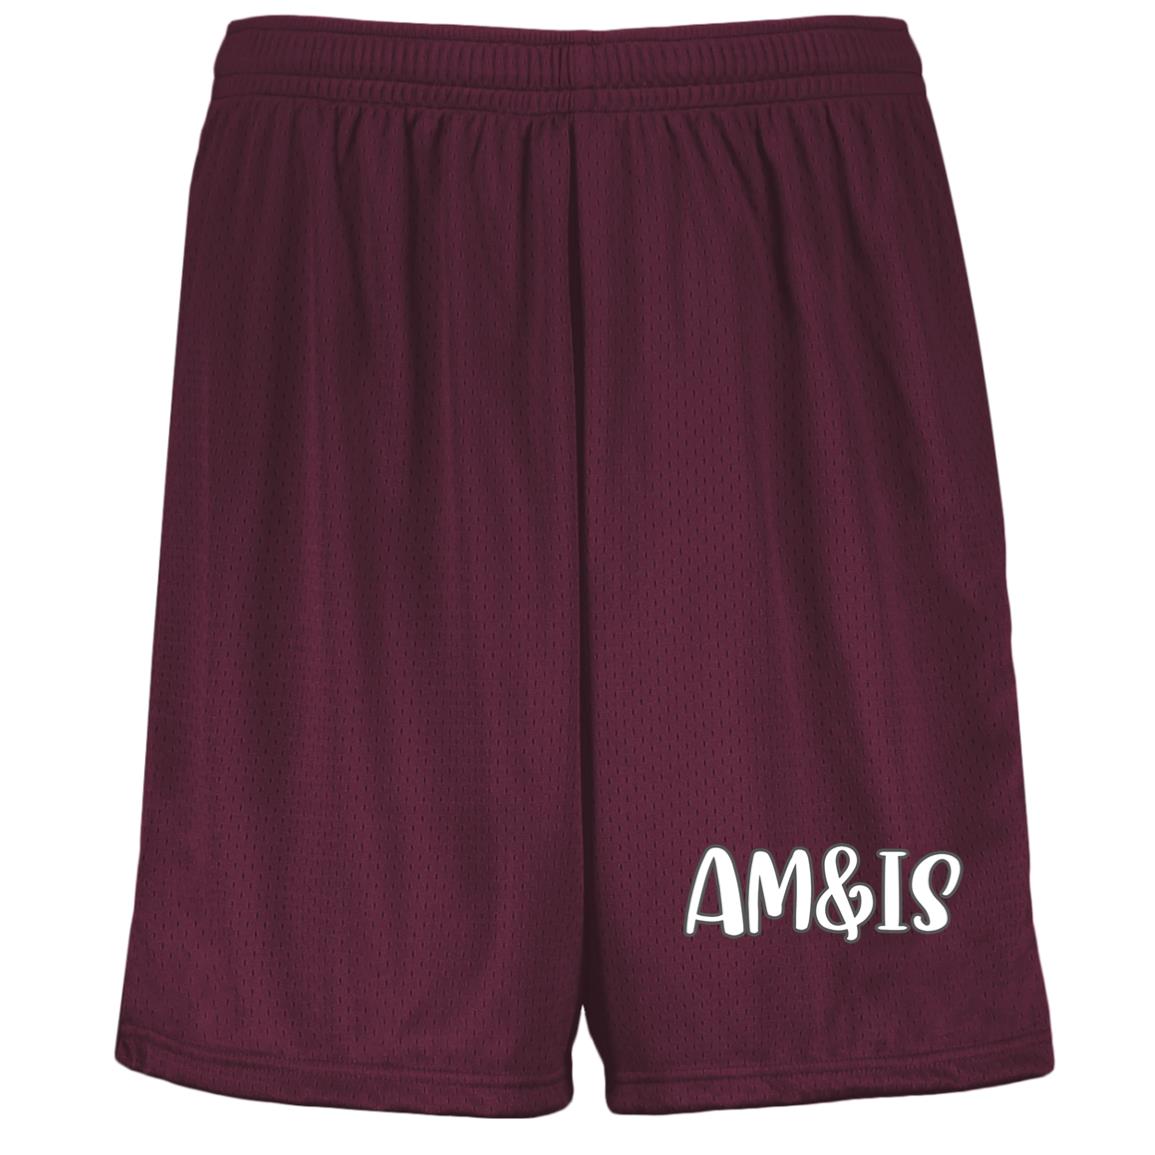 MAROON - AM&IS Activewear Youth Moisture-Wicking Mesh Shorts - kids shorts at TFC&H Co.